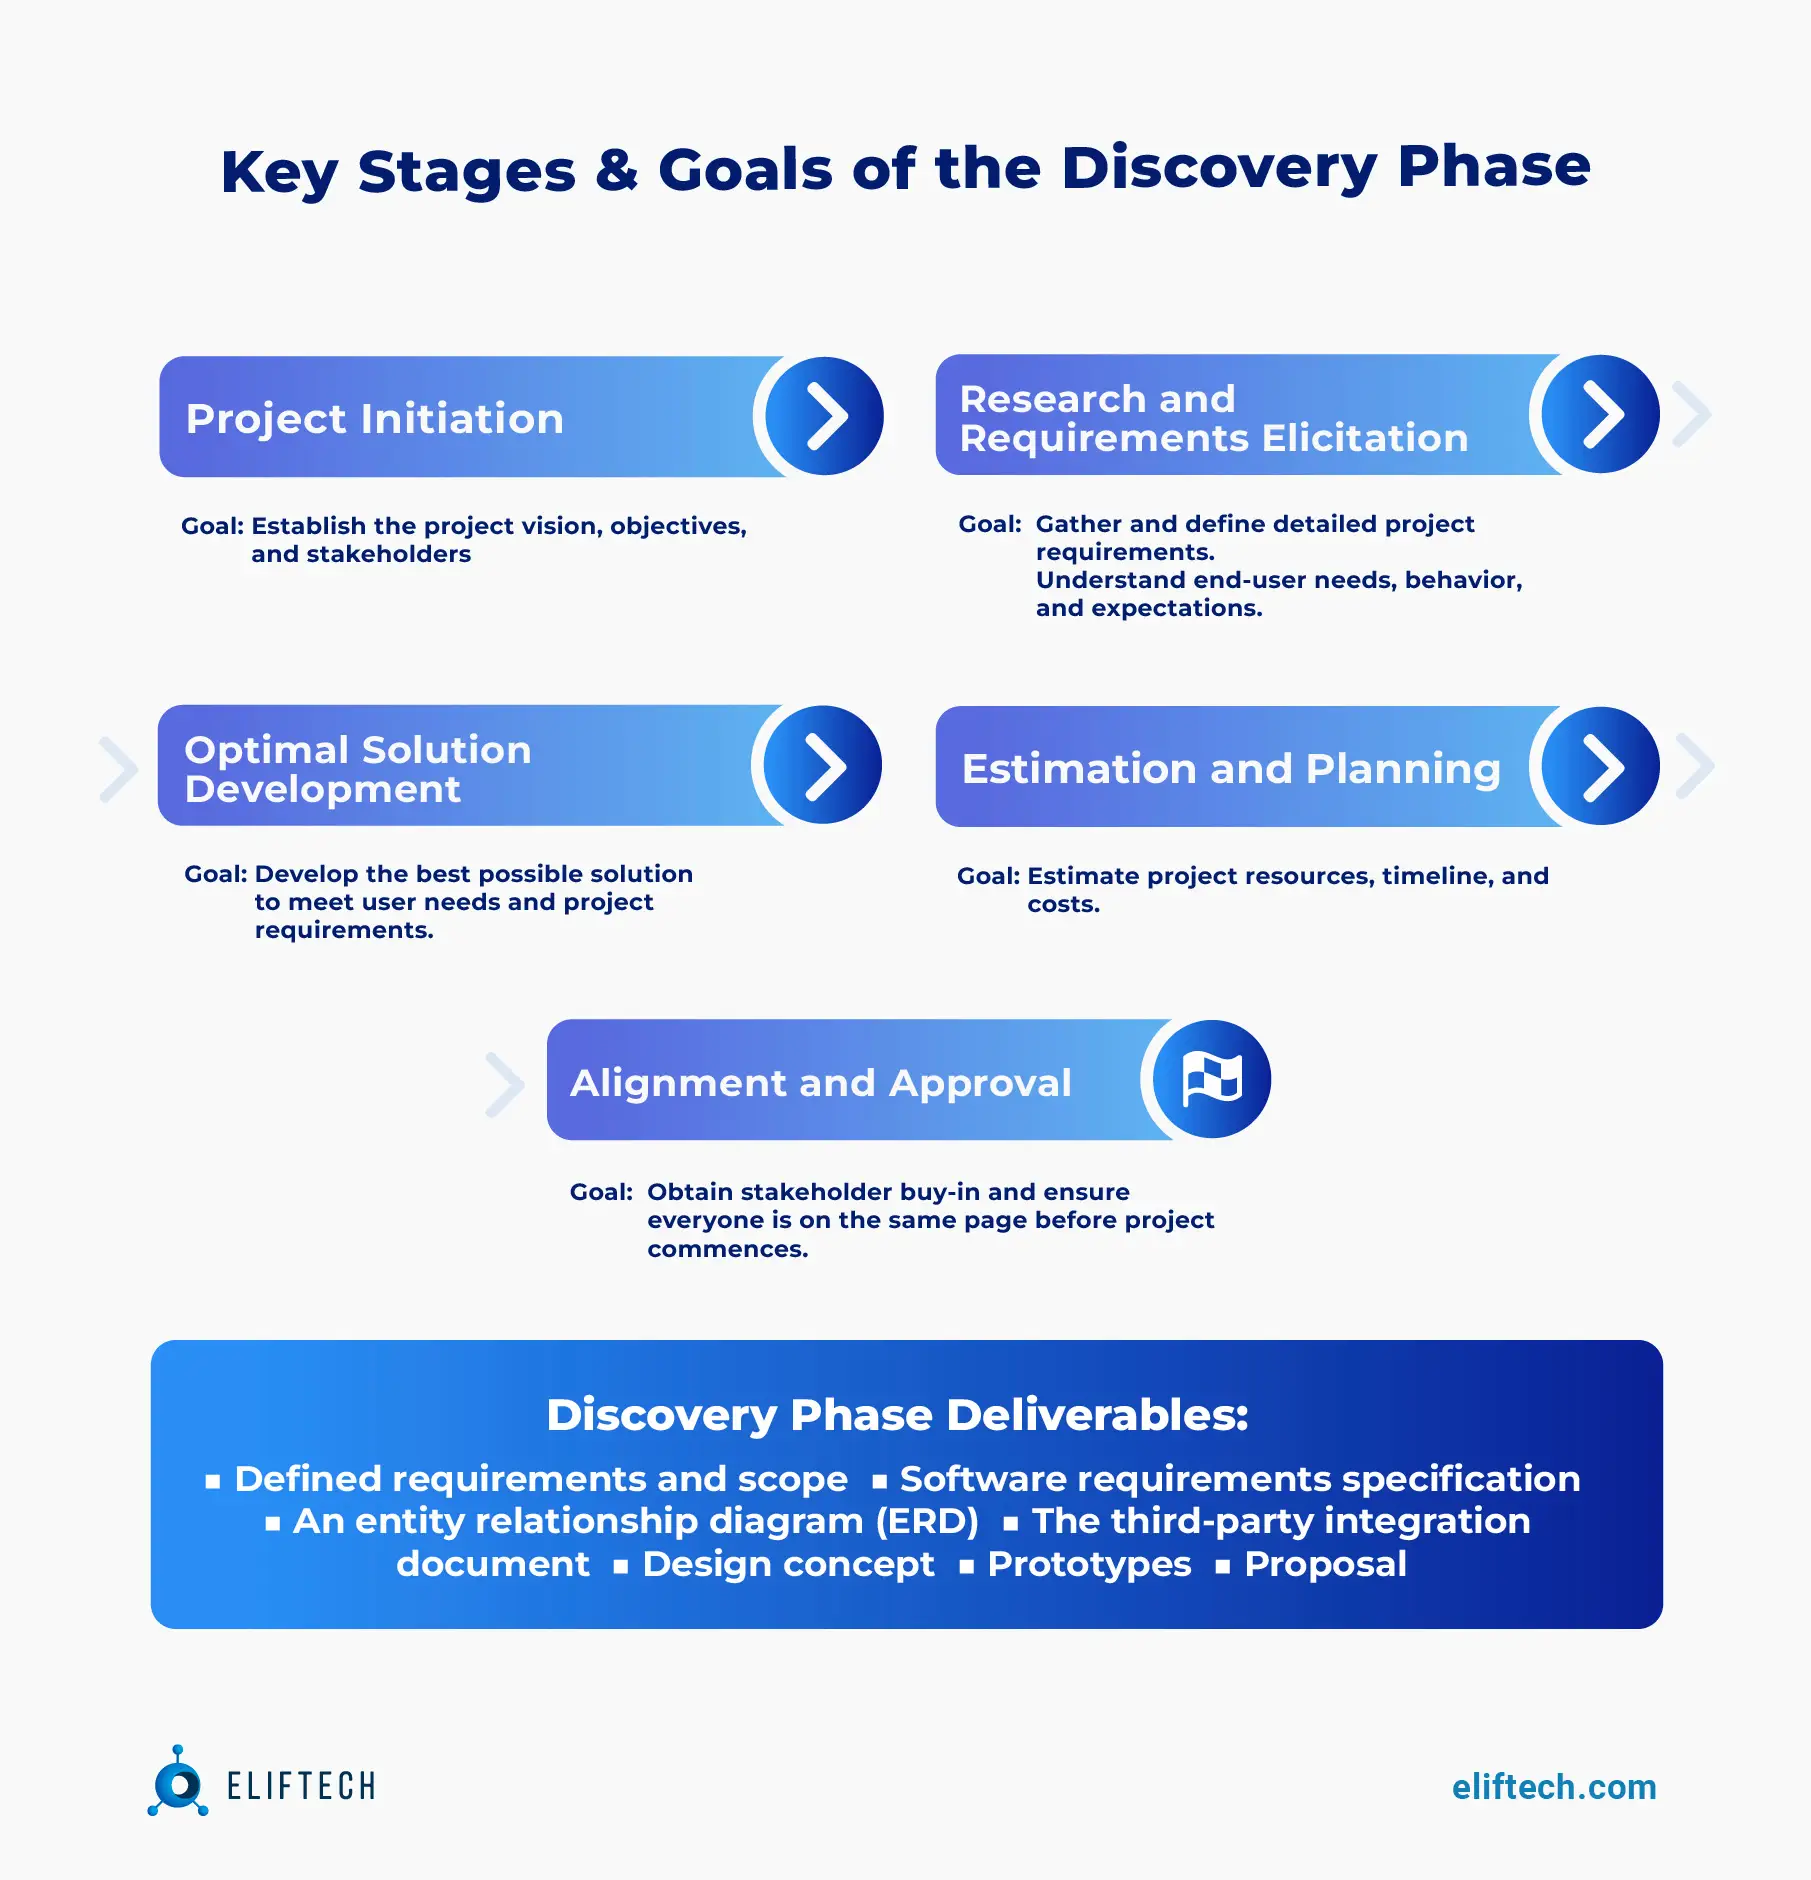 Key Stages & Goals of the Discovery Phase